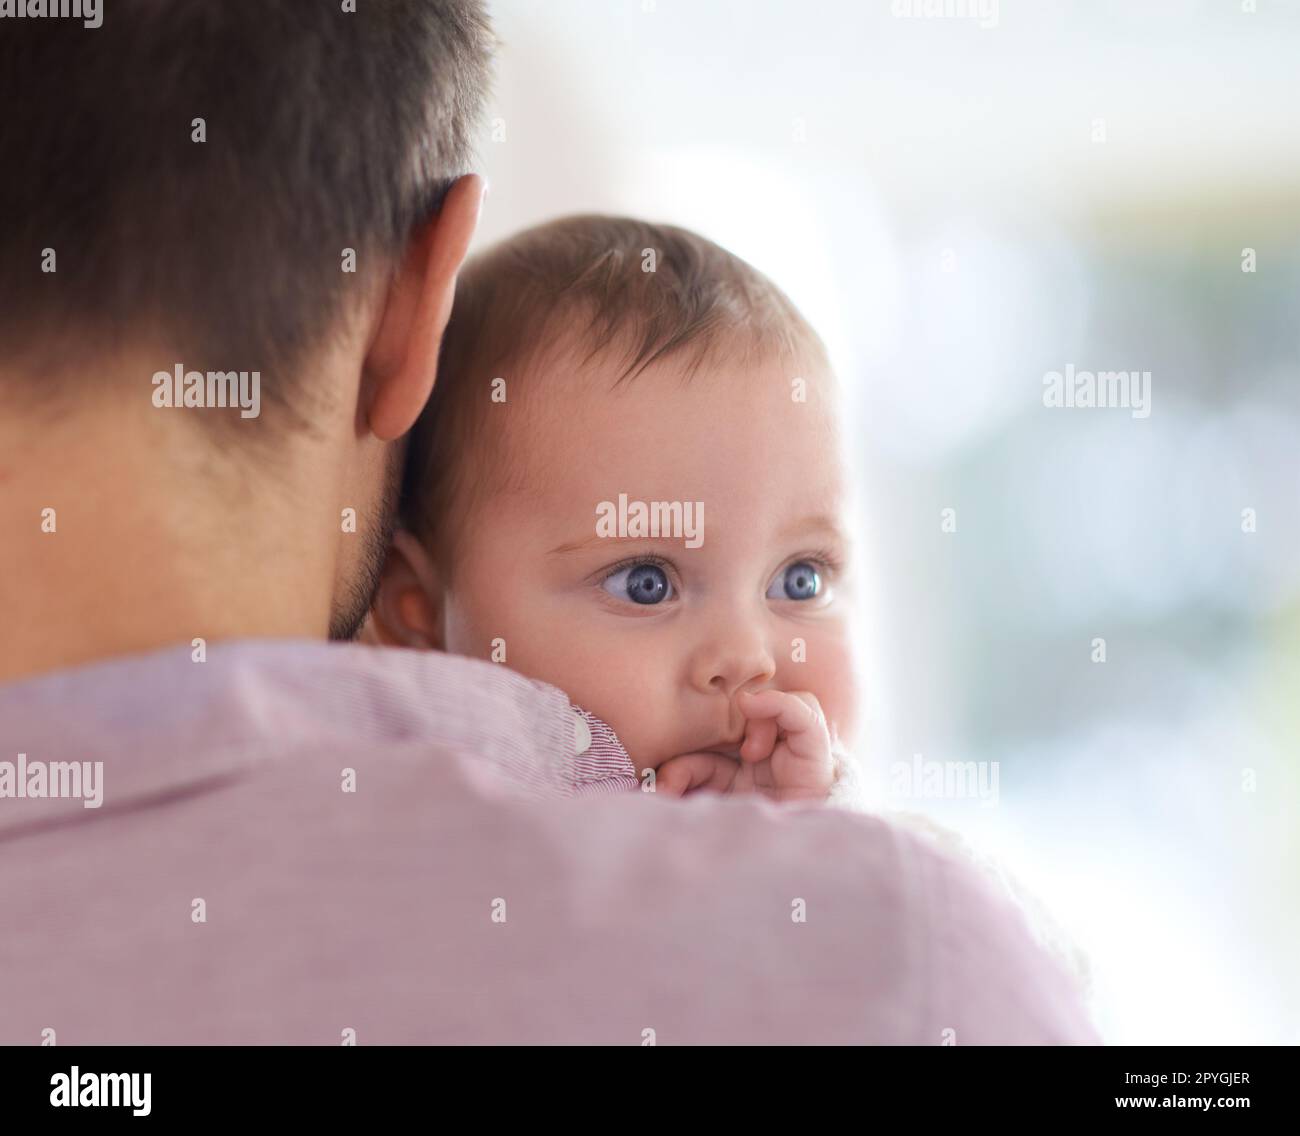 Daddys little angel. a baby girl looking over her fathers shoulder. Stock Photo